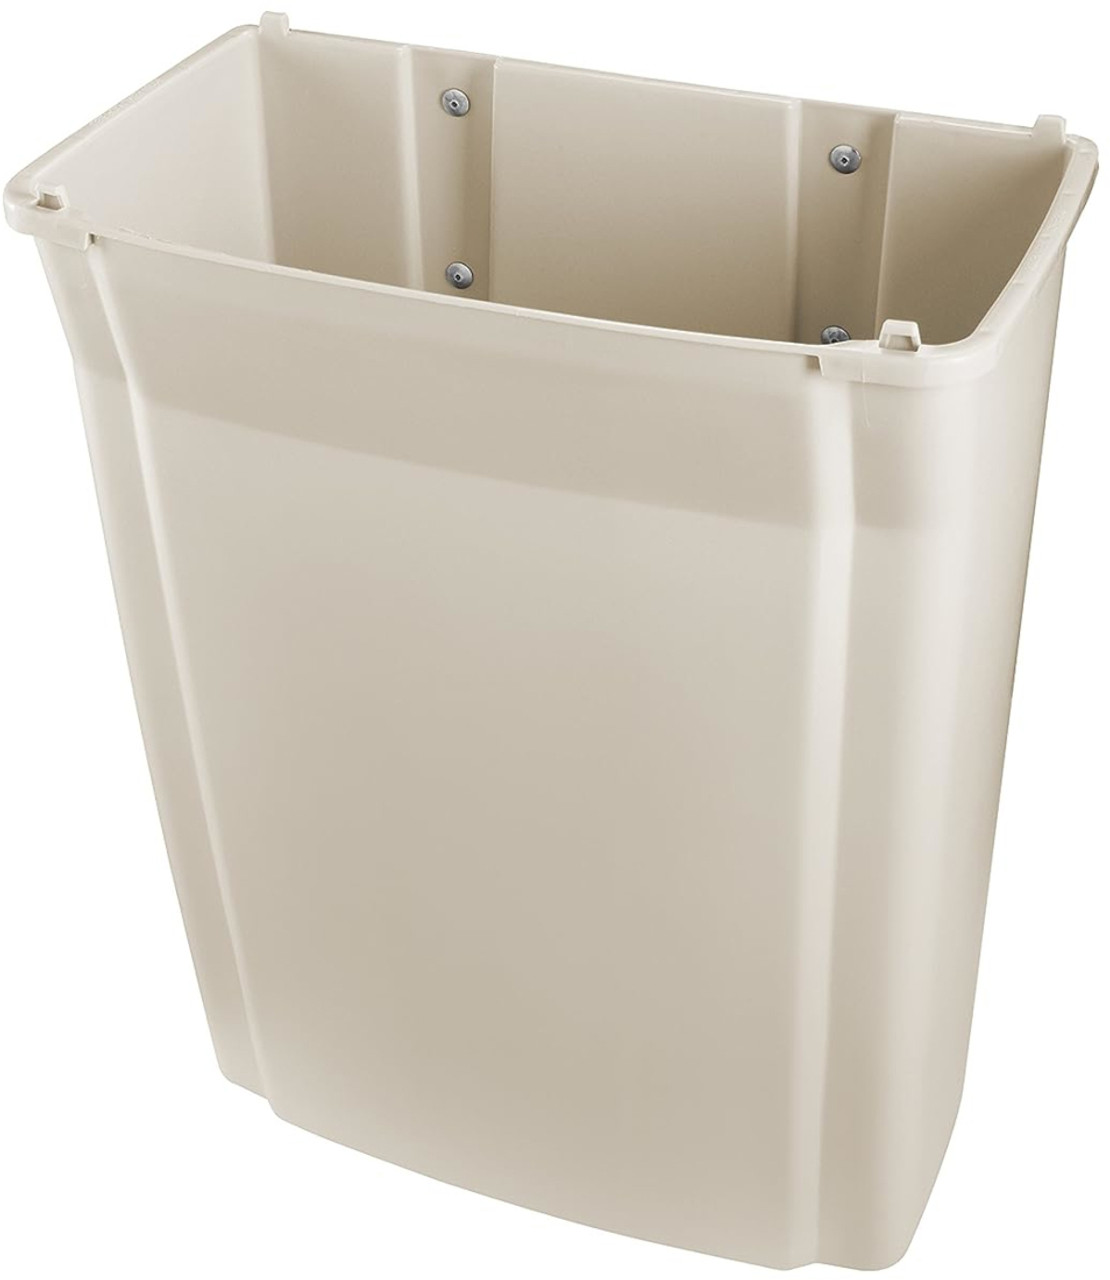 FG782200BEIG - Rubbermaid Profile Wall-Mounted Container with lid removed